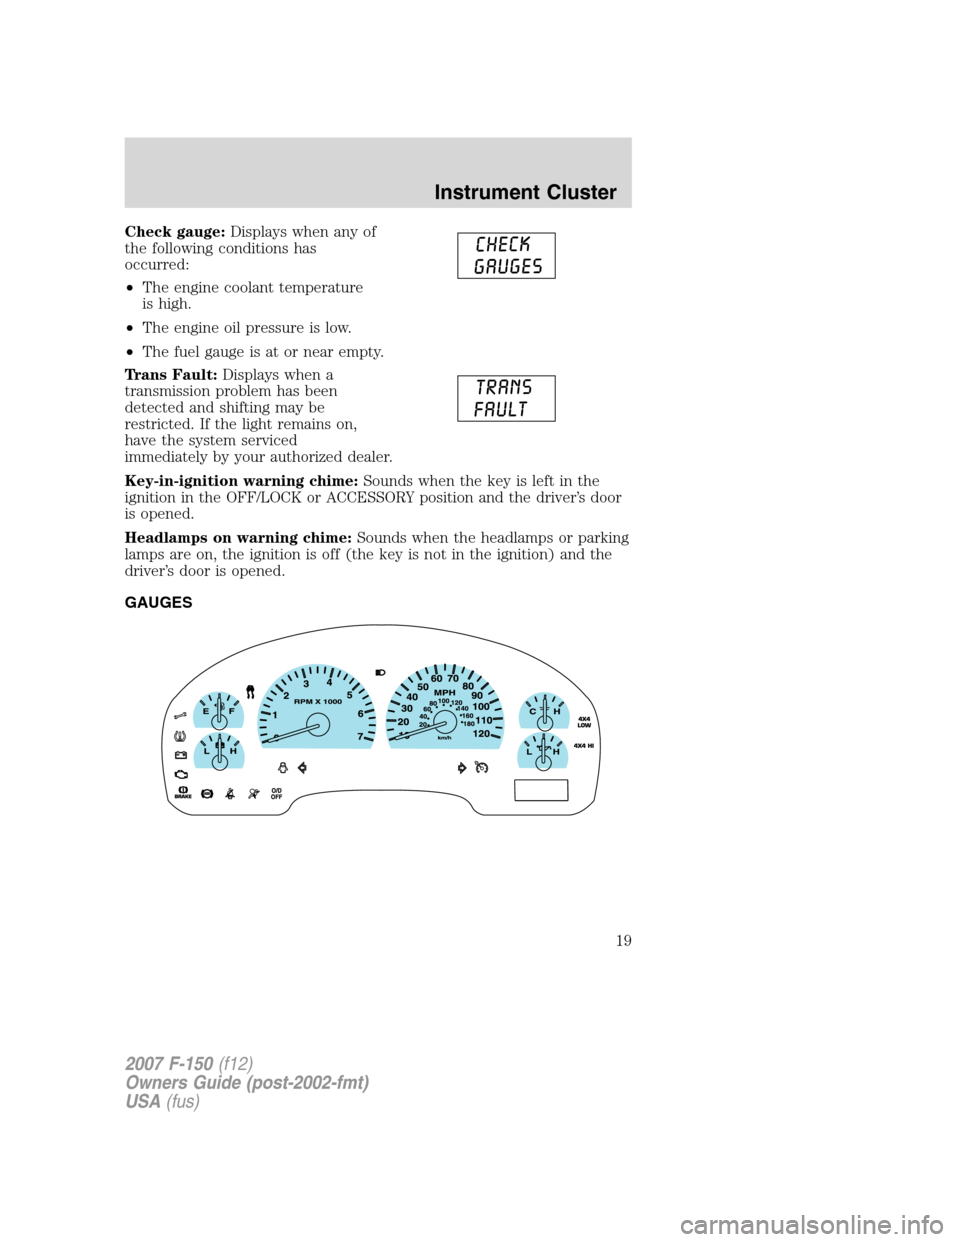 FORD F150 2007 11.G Owners Manual Check gauge:Displays when any of
the following conditions has
occurred:
•The engine coolant temperature
is high.
•The engine oil pressure is low.
•The fuel gauge is at or near empty.
Trans Fault